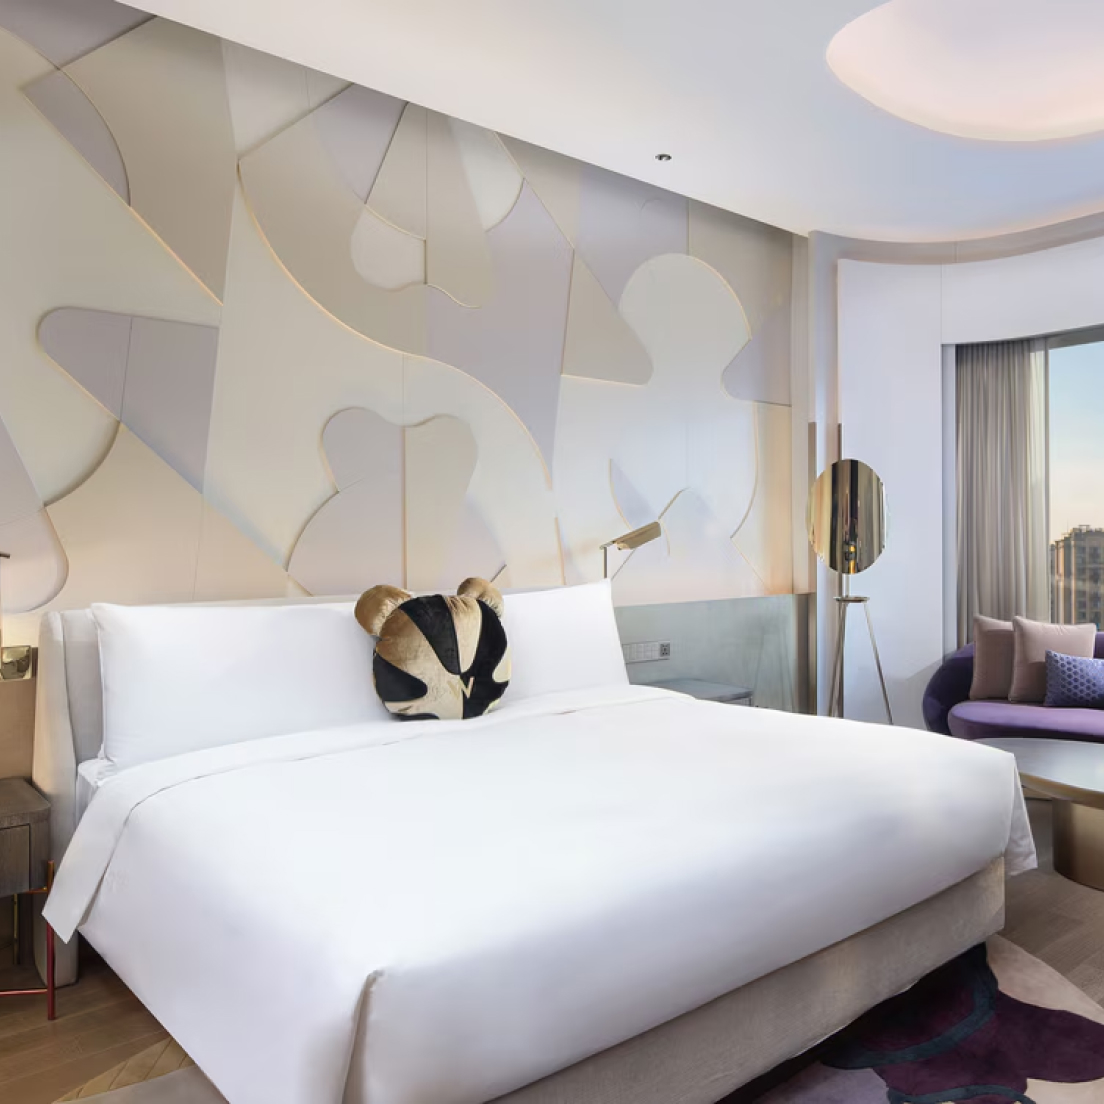 A modern hotel room with a large bed decorated with white linens and a black-and-gold heart-shaped pillow. The room features abstract wall art, a large floor lamp, a purple armchair with pillows, and a large window with a view of a cityscape.